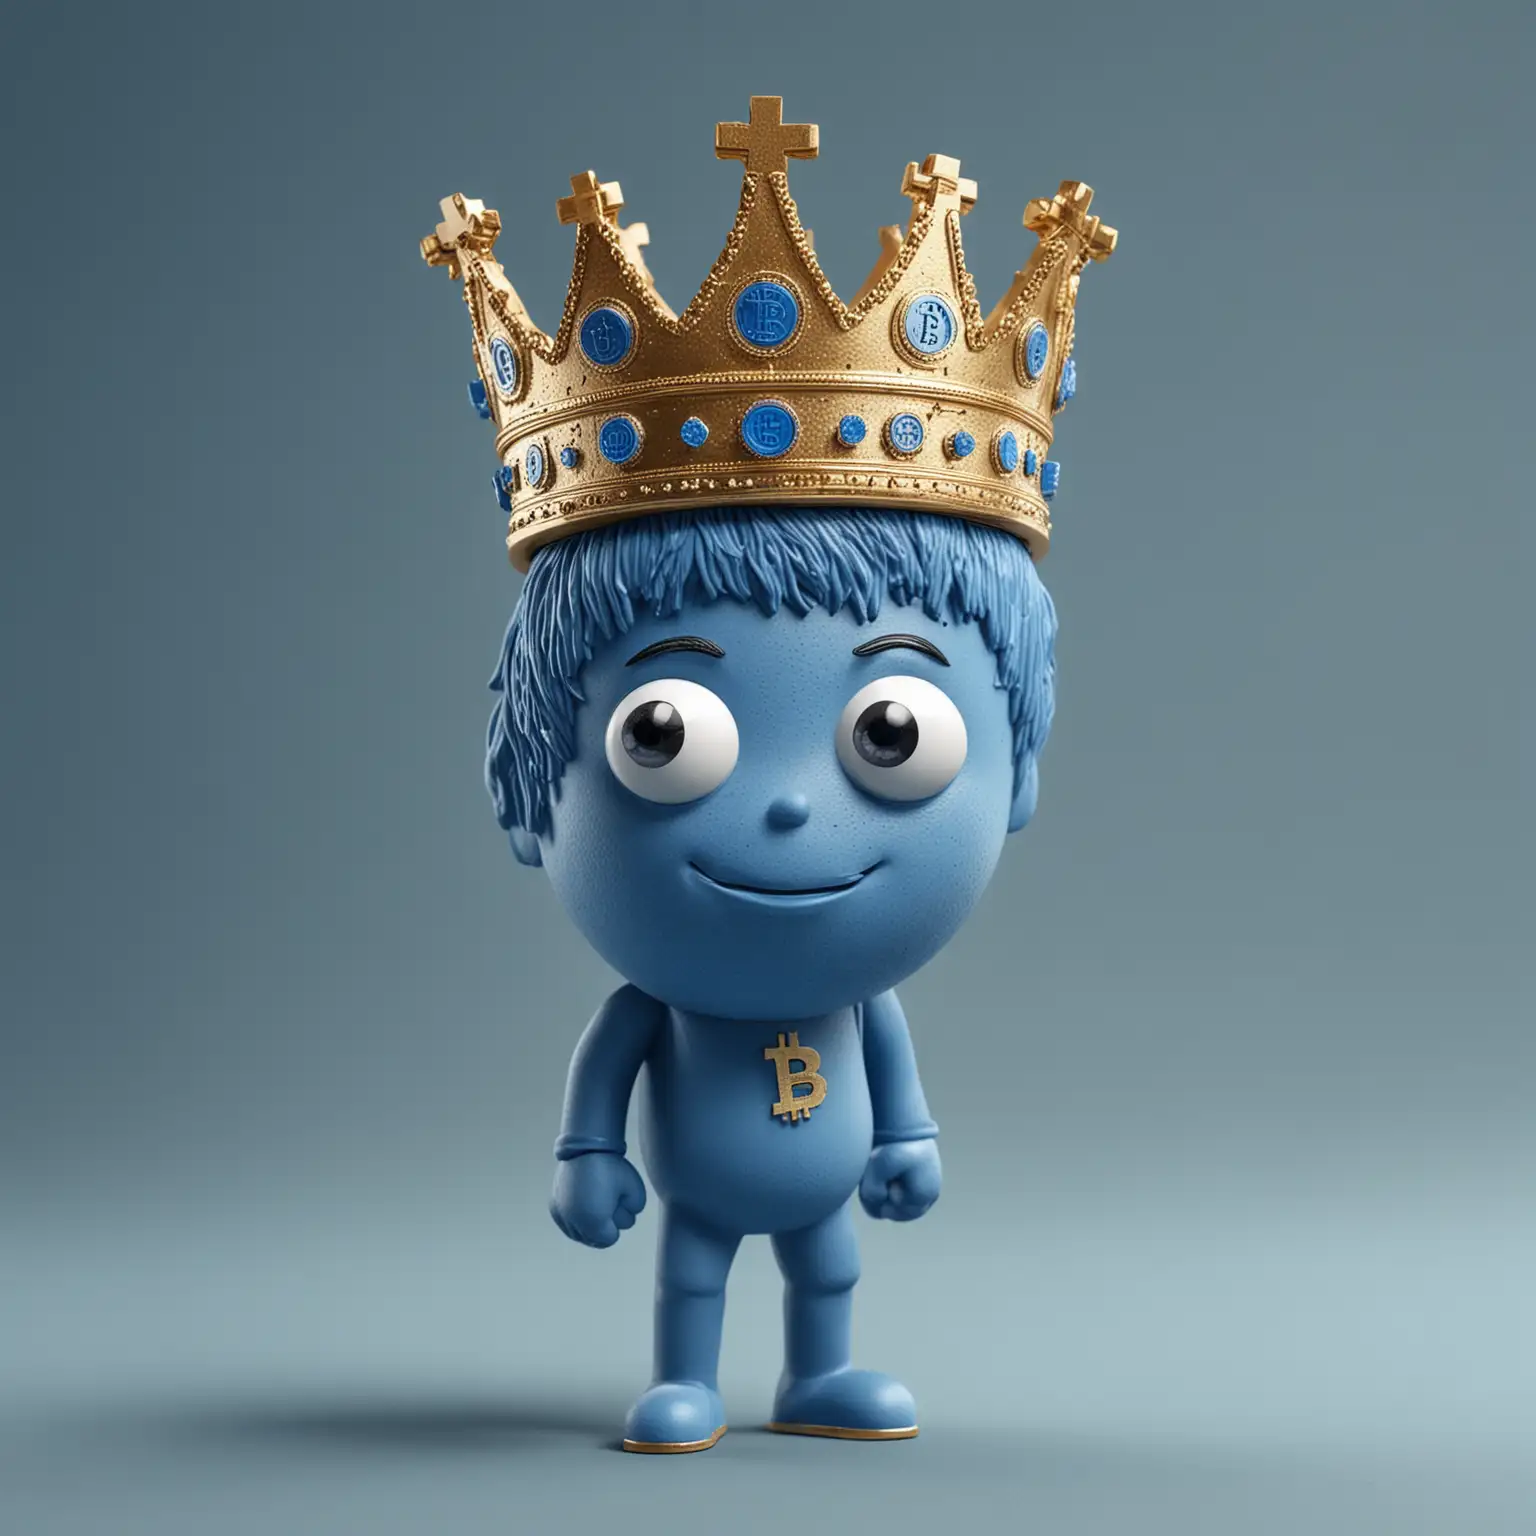 Regal Blue Bitcoin Figure with Crown